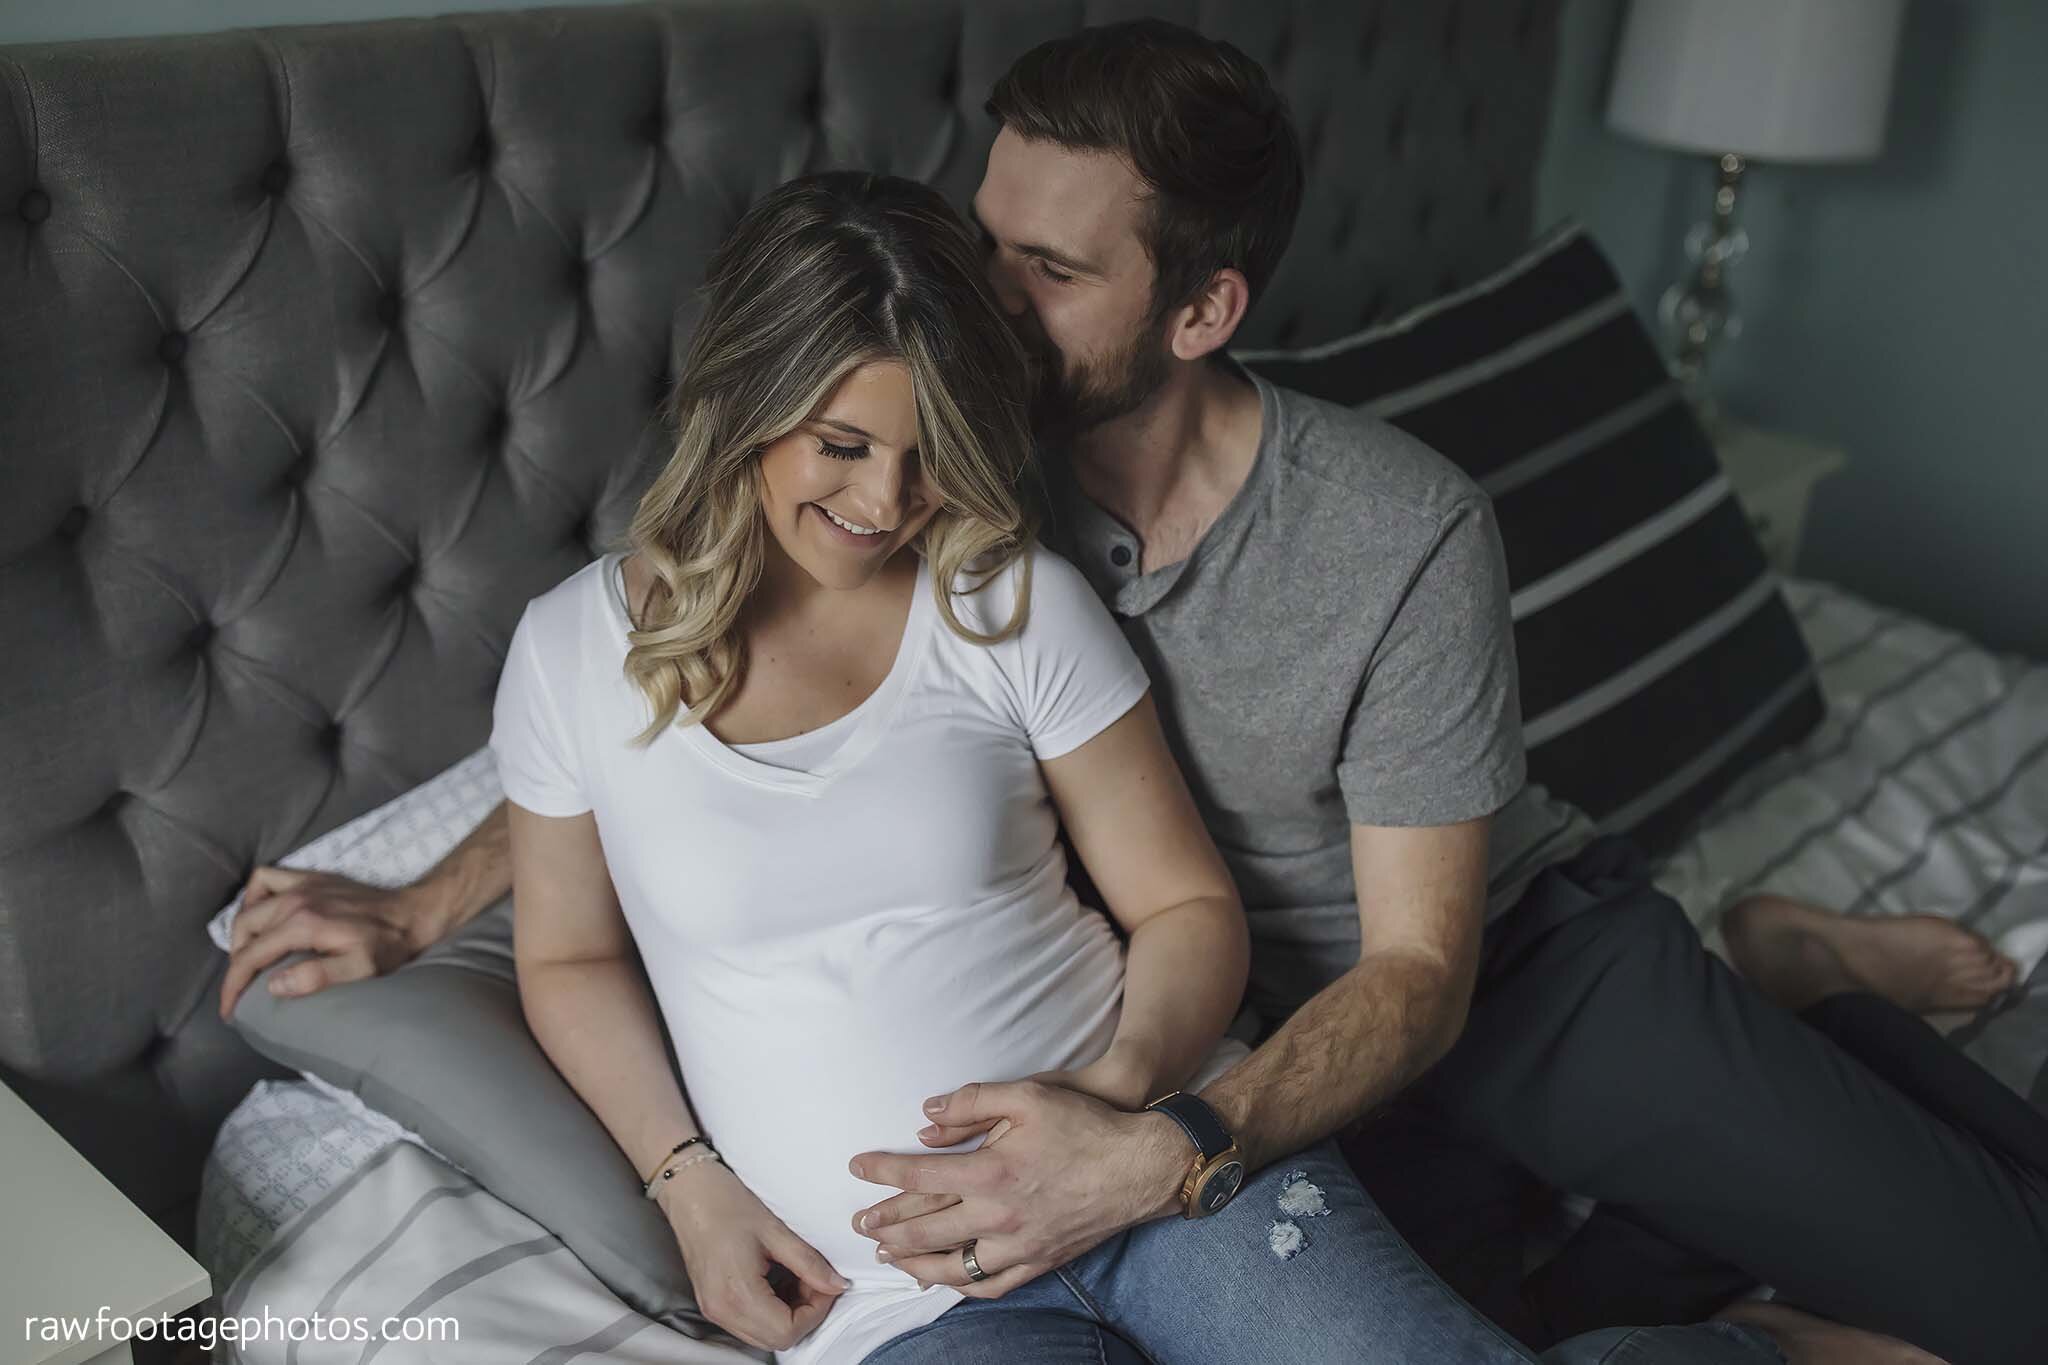 london_ontario_maternity_photographer-raw_footage_photography-in_home_lifestyle_maternity-forest_maternity_session-yellow_maternity_dress_007.jpg